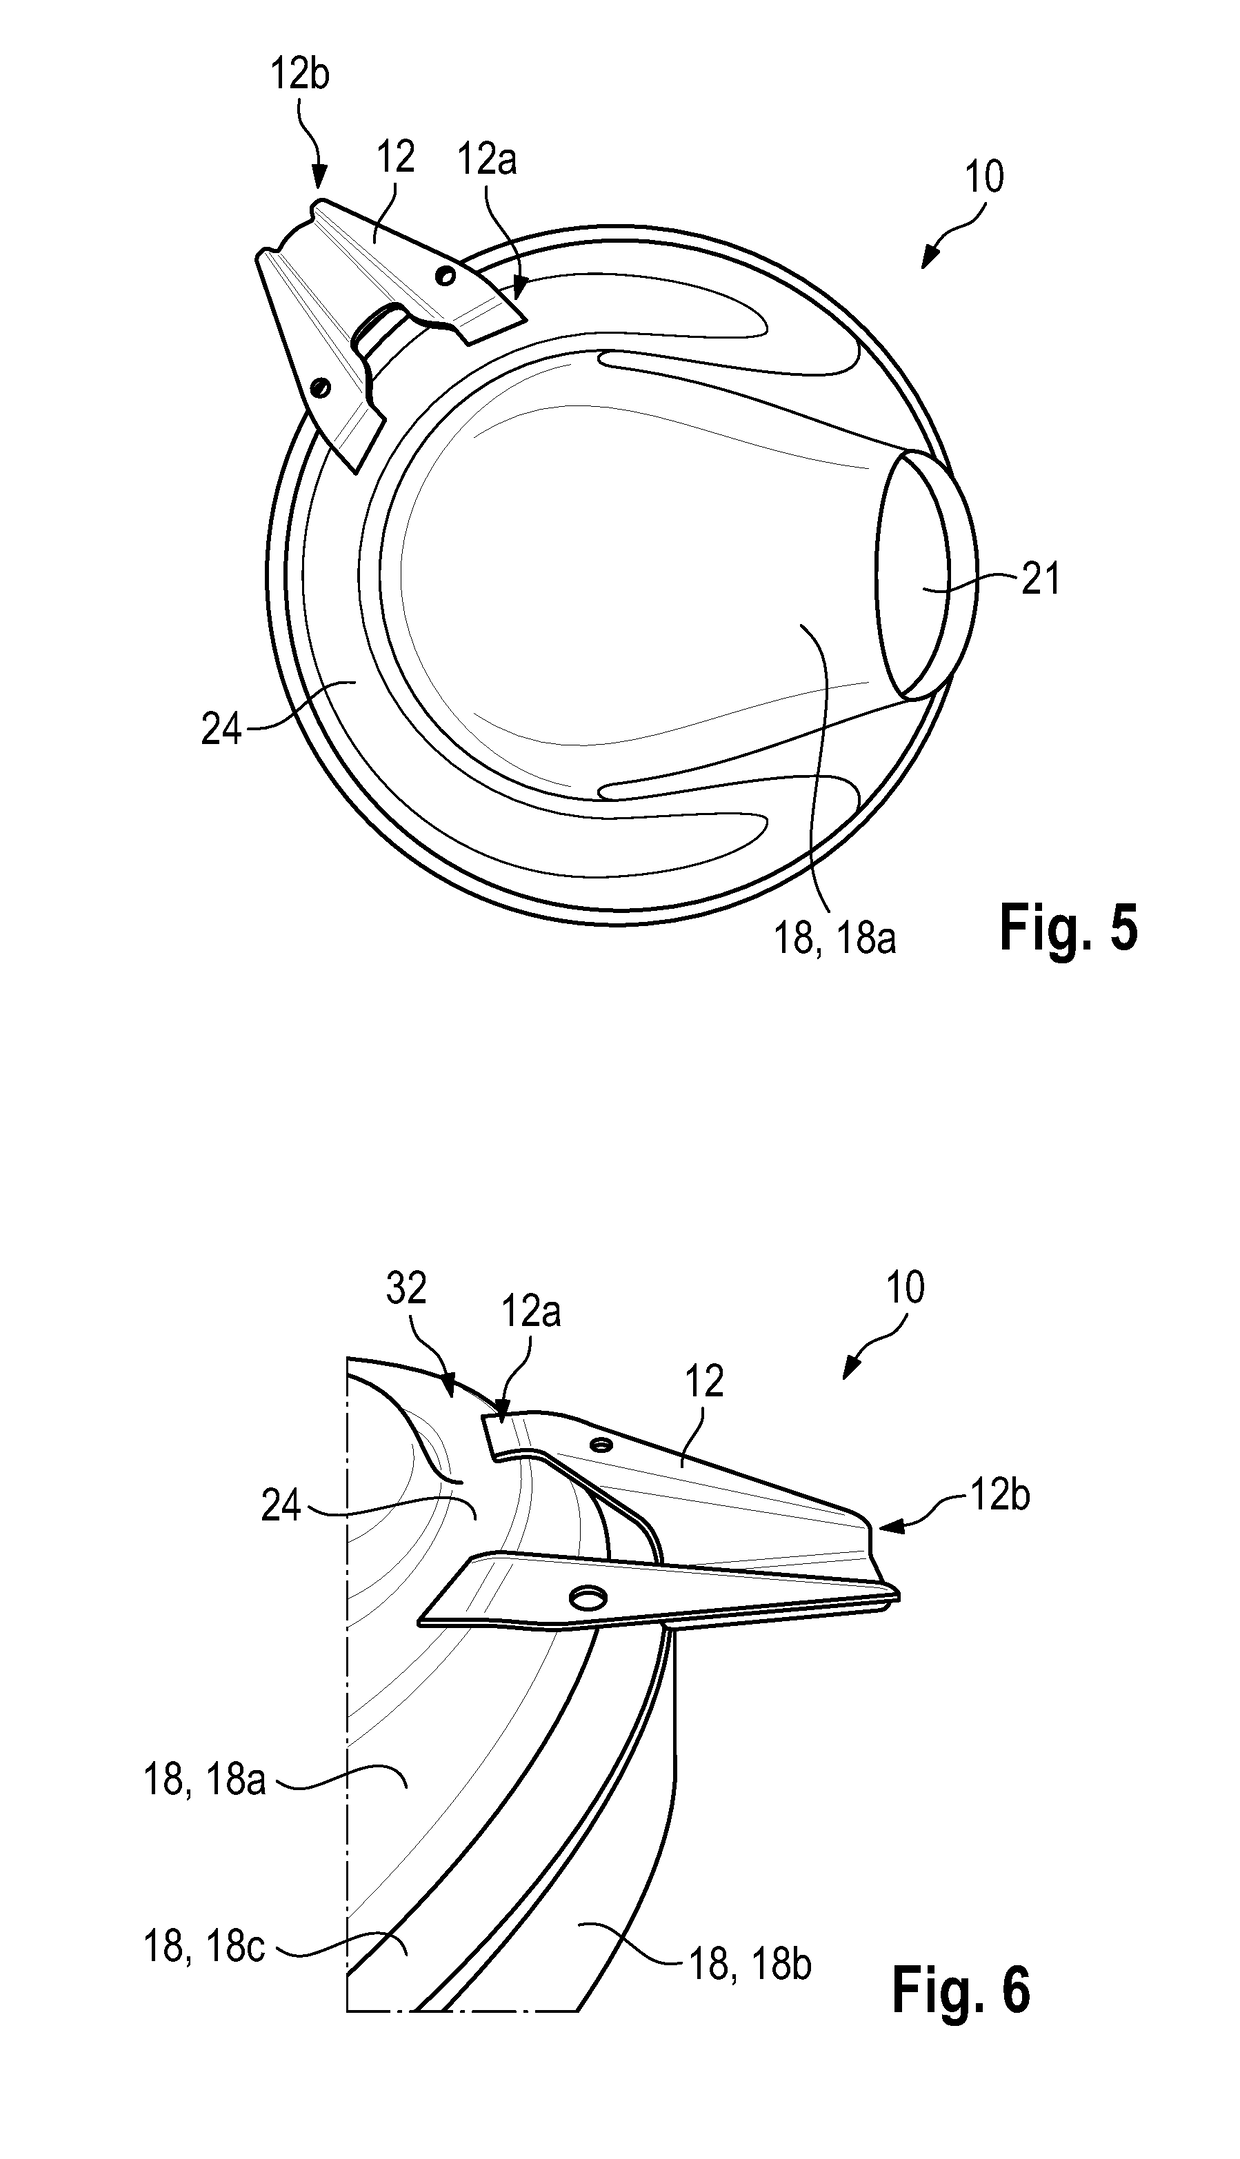 Sound generating assembly for an exhaust system